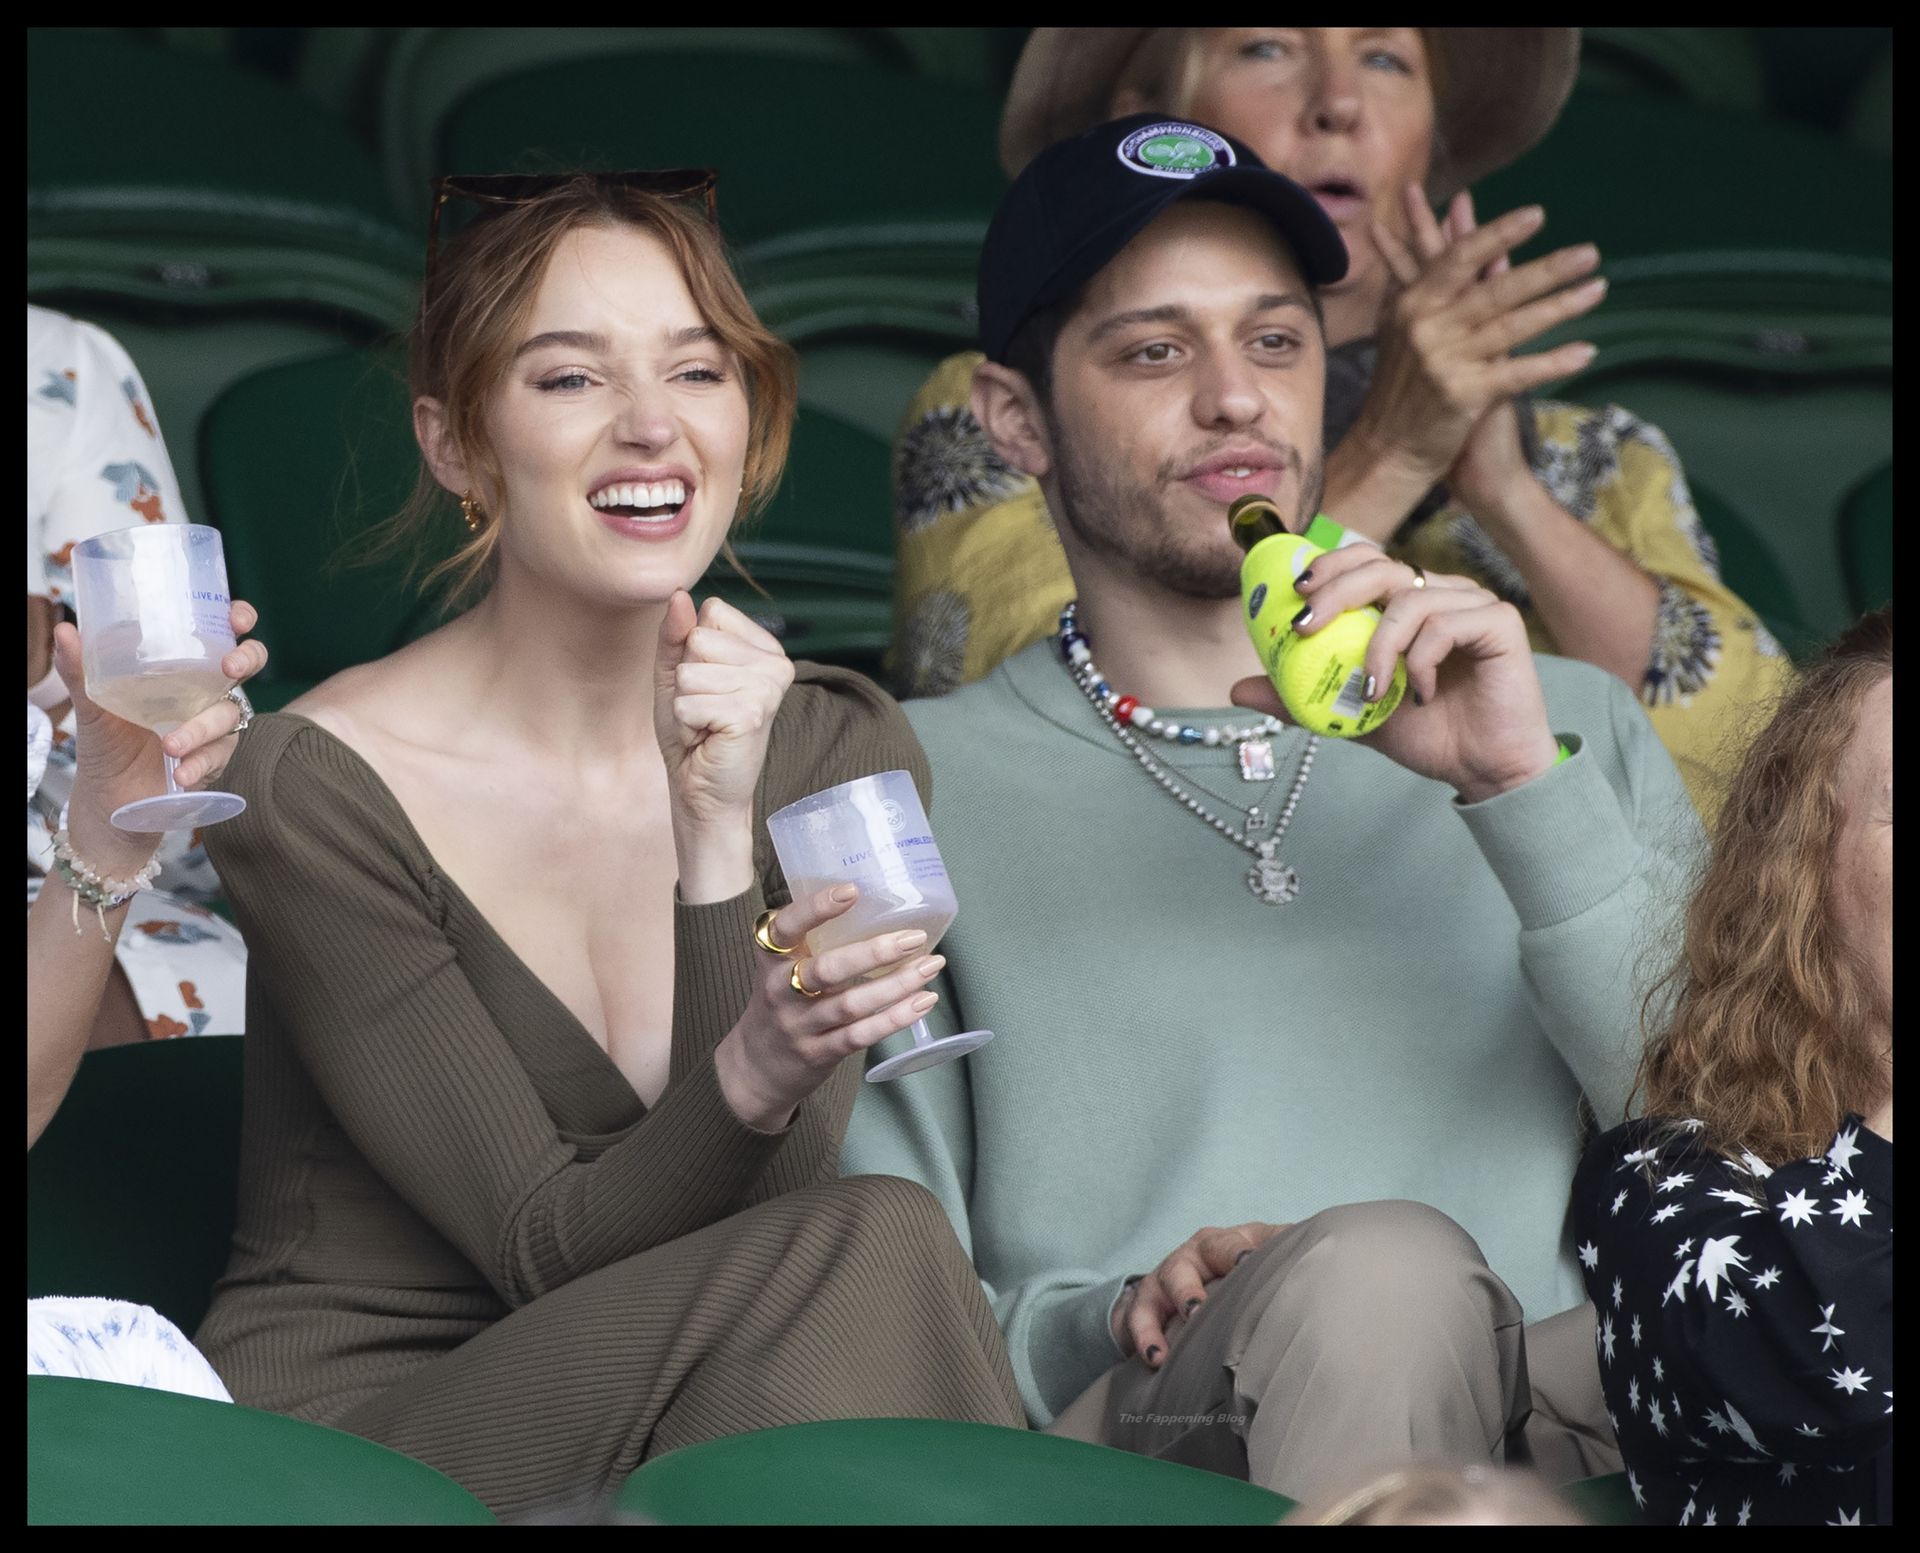 Braless Phoebe Dynevor & Pete Davidson Look Happy a
t the Wimbledon in London (93 Photos)